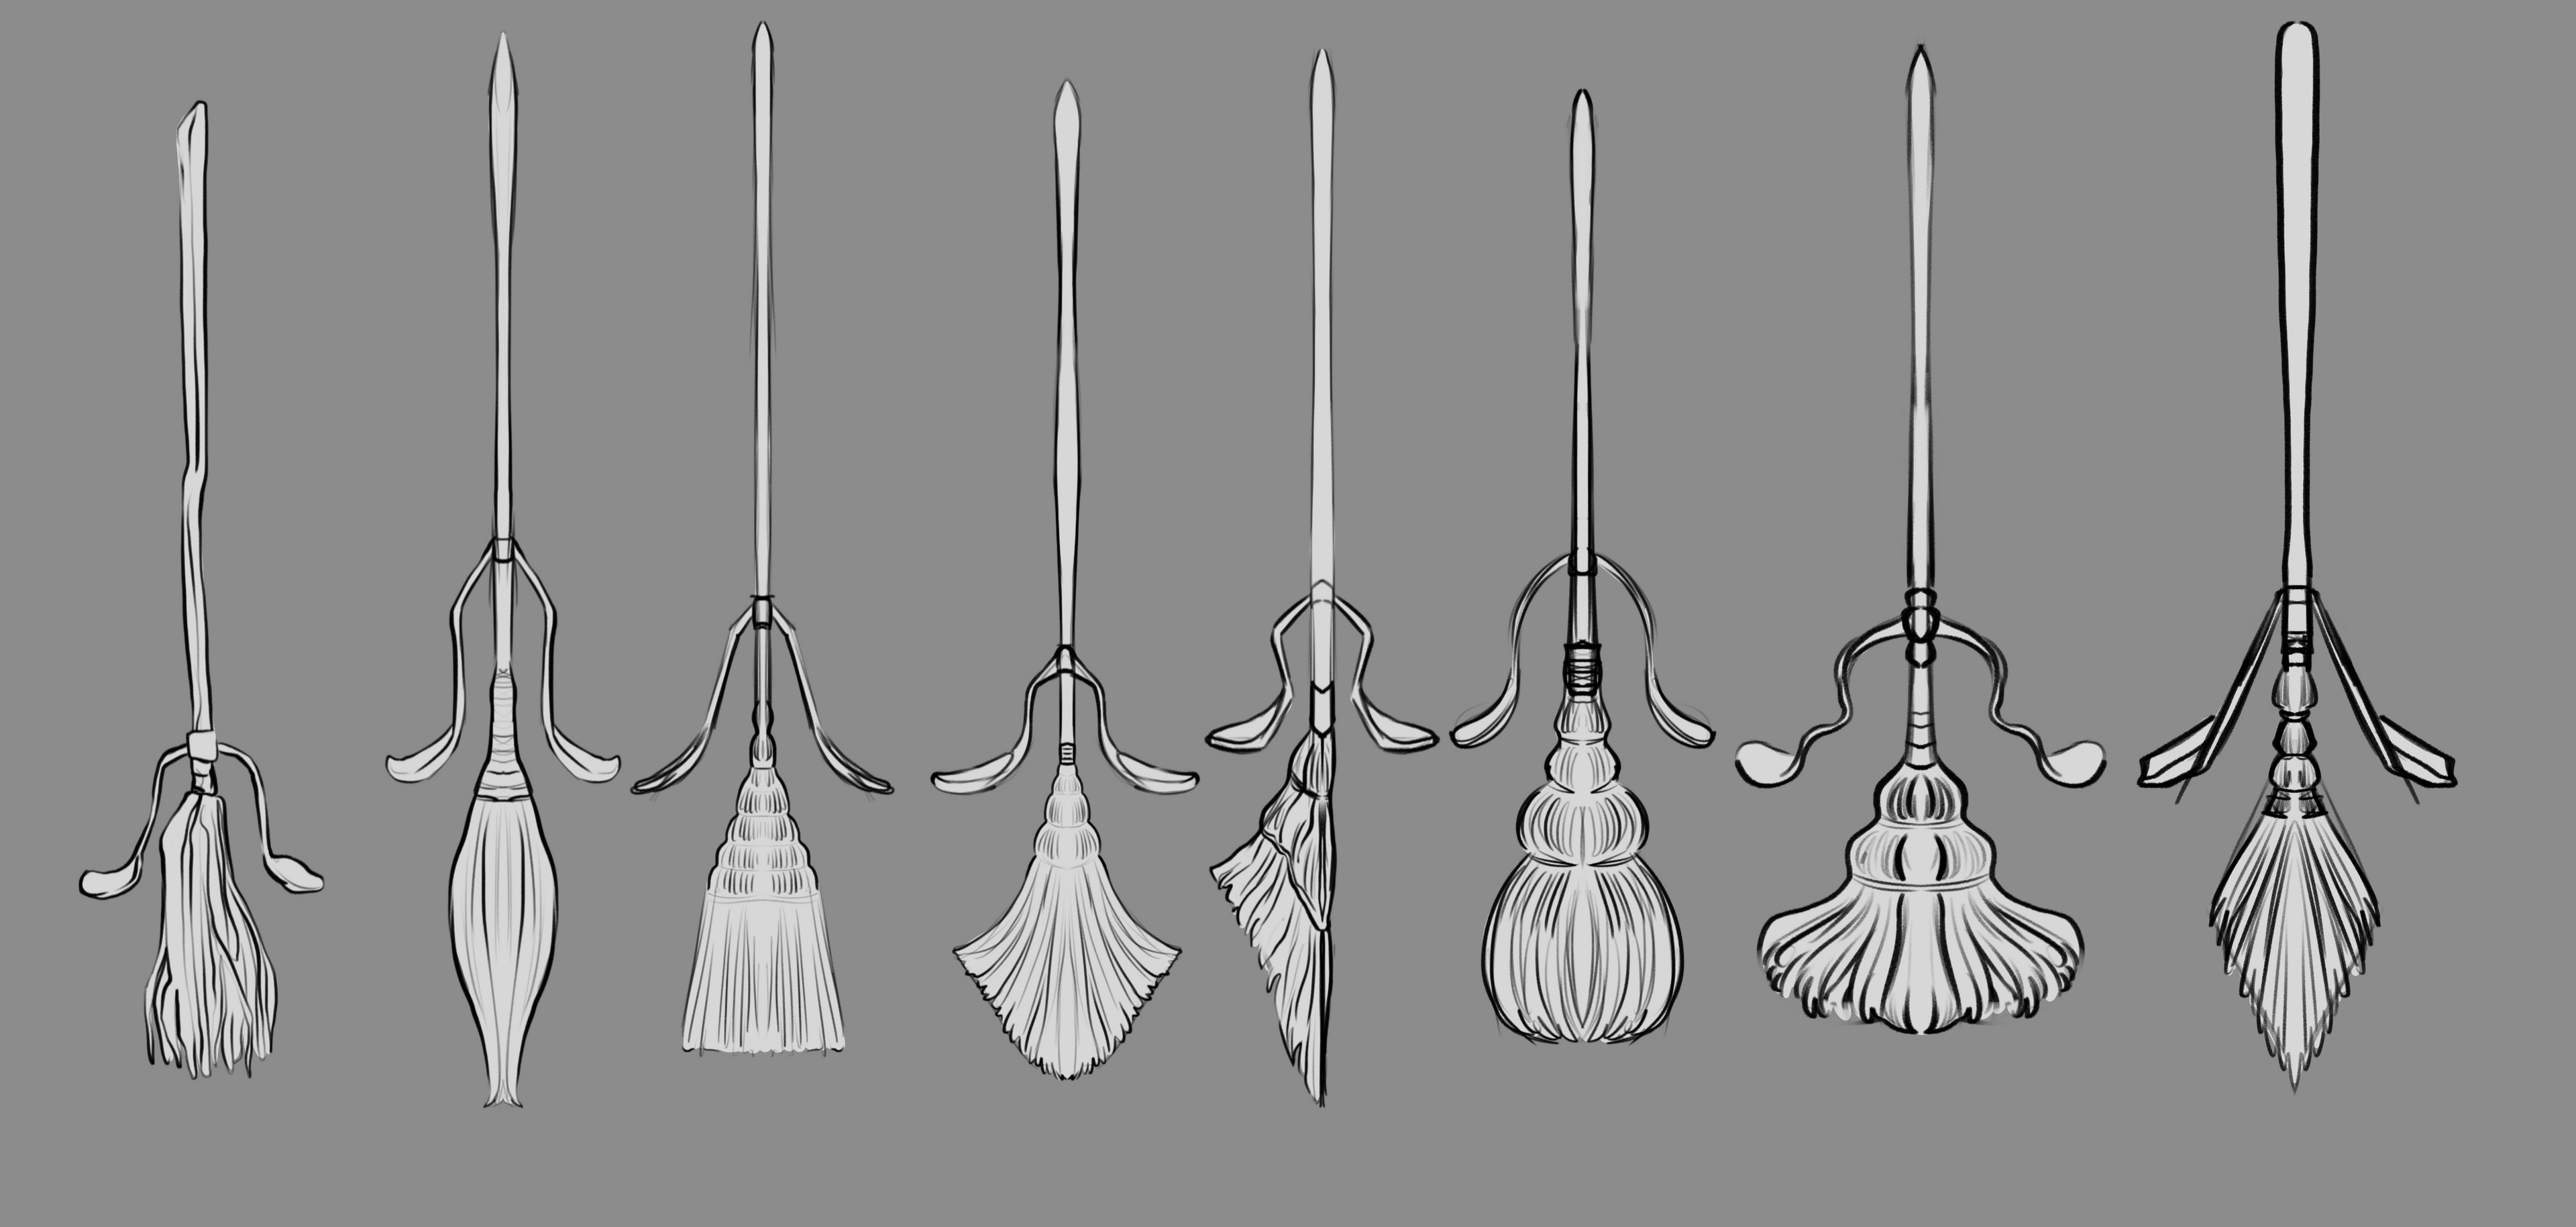 Broom exploration, inspired by Japanese brooms.